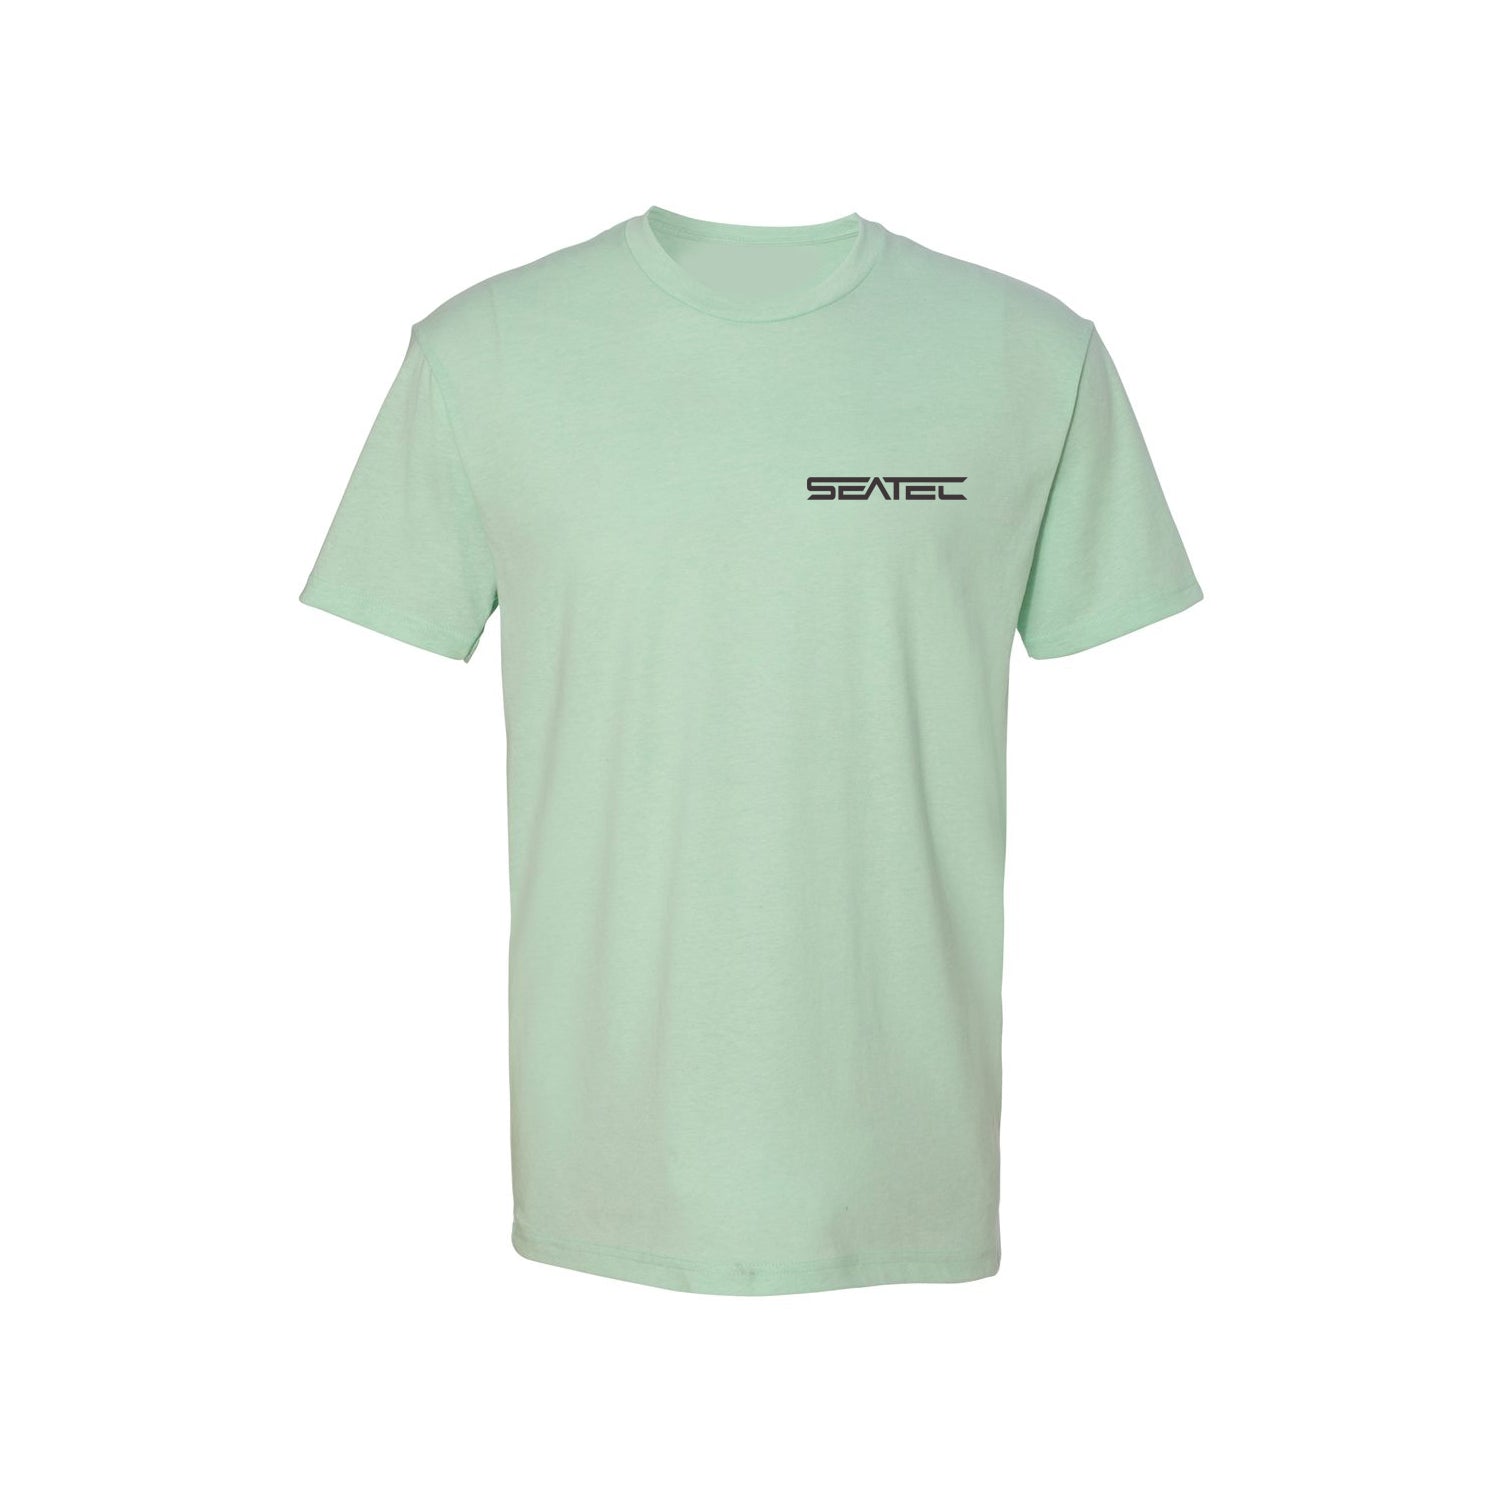 Seatec Outfitters Tarpon Short Sleeve T-Shirt